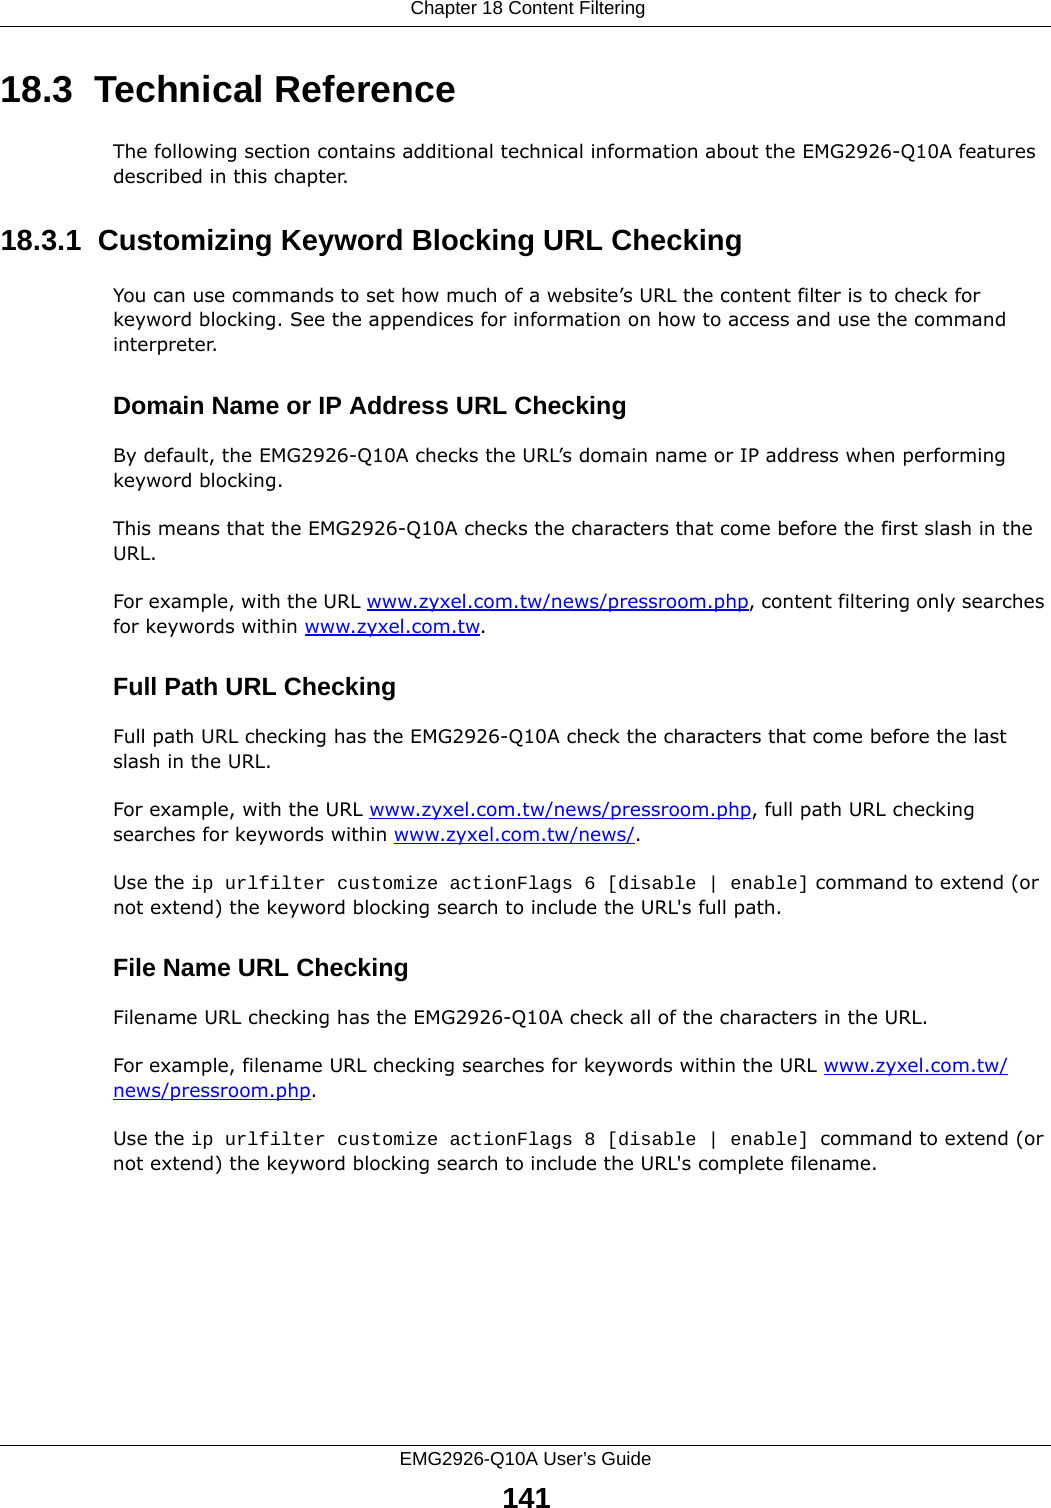  Chapter 18 Content FilteringEMG2926-Q10A User’s Guide14118.3  Technical ReferenceThe following section contains additional technical information about the EMG2926-Q10A features described in this chapter.18.3.1  Customizing Keyword Blocking URL CheckingYou can use commands to set how much of a website’s URL the content filter is to check for keyword blocking. See the appendices for information on how to access and use the command interpreter.Domain Name or IP Address URL CheckingBy default, the EMG2926-Q10A checks the URL’s domain name or IP address when performing keyword blocking.This means that the EMG2926-Q10A checks the characters that come before the first slash in the URL.For example, with the URL www.zyxel.com.tw/news/pressroom.php, content filtering only searches for keywords within www.zyxel.com.tw.Full Path URL CheckingFull path URL checking has the EMG2926-Q10A check the characters that come before the last slash in the URL.For example, with the URL www.zyxel.com.tw/news/pressroom.php, full path URL checking searches for keywords within www.zyxel.com.tw/news/.Use the ip urlfilter customize actionFlags 6 [disable | enable] command to extend (or not extend) the keyword blocking search to include the URL&apos;s full path.File Name URL CheckingFilename URL checking has the EMG2926-Q10A check all of the characters in the URL.For example, filename URL checking searches for keywords within the URL www.zyxel.com.tw/news/pressroom.php.Use the ip urlfilter customize actionFlags 8 [disable | enable] command to extend (or not extend) the keyword blocking search to include the URL&apos;s complete filename.